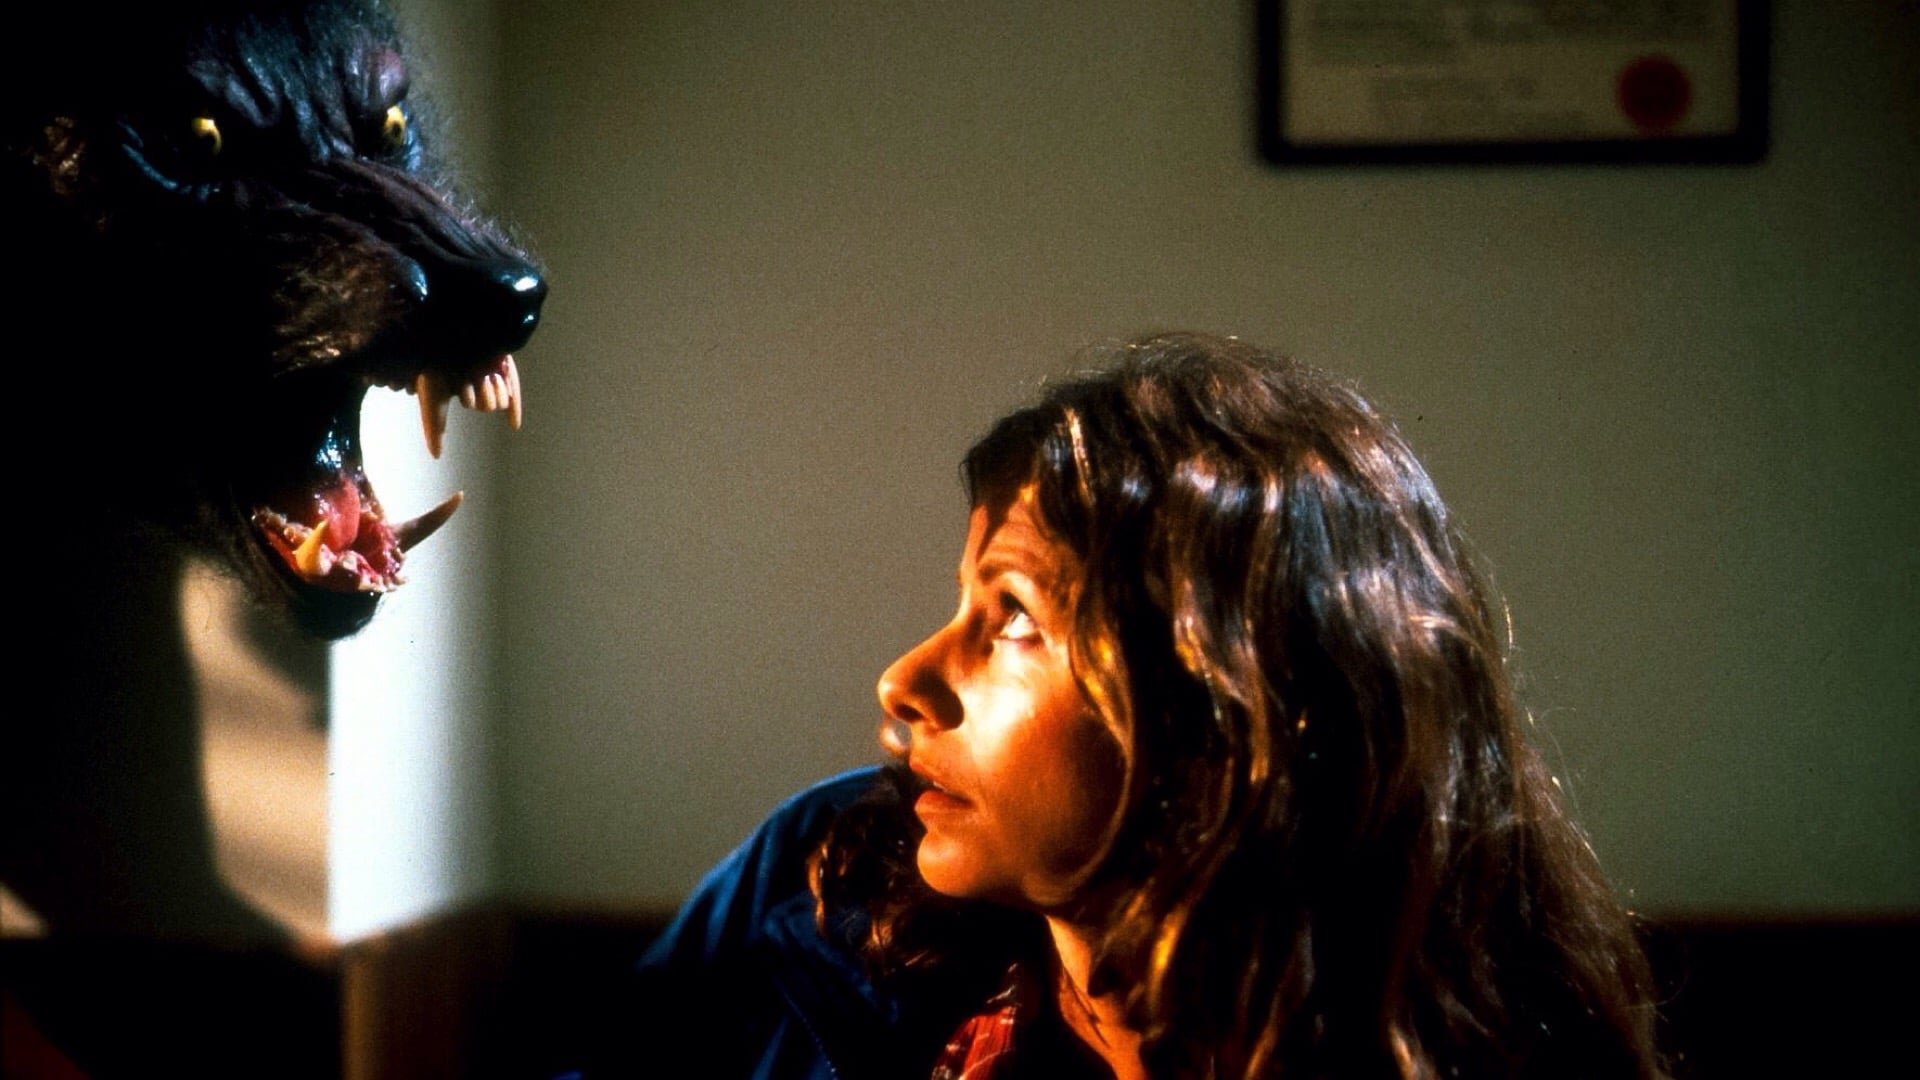 Stop-motion werewolves seen briefly at the end of The Howling (1981)